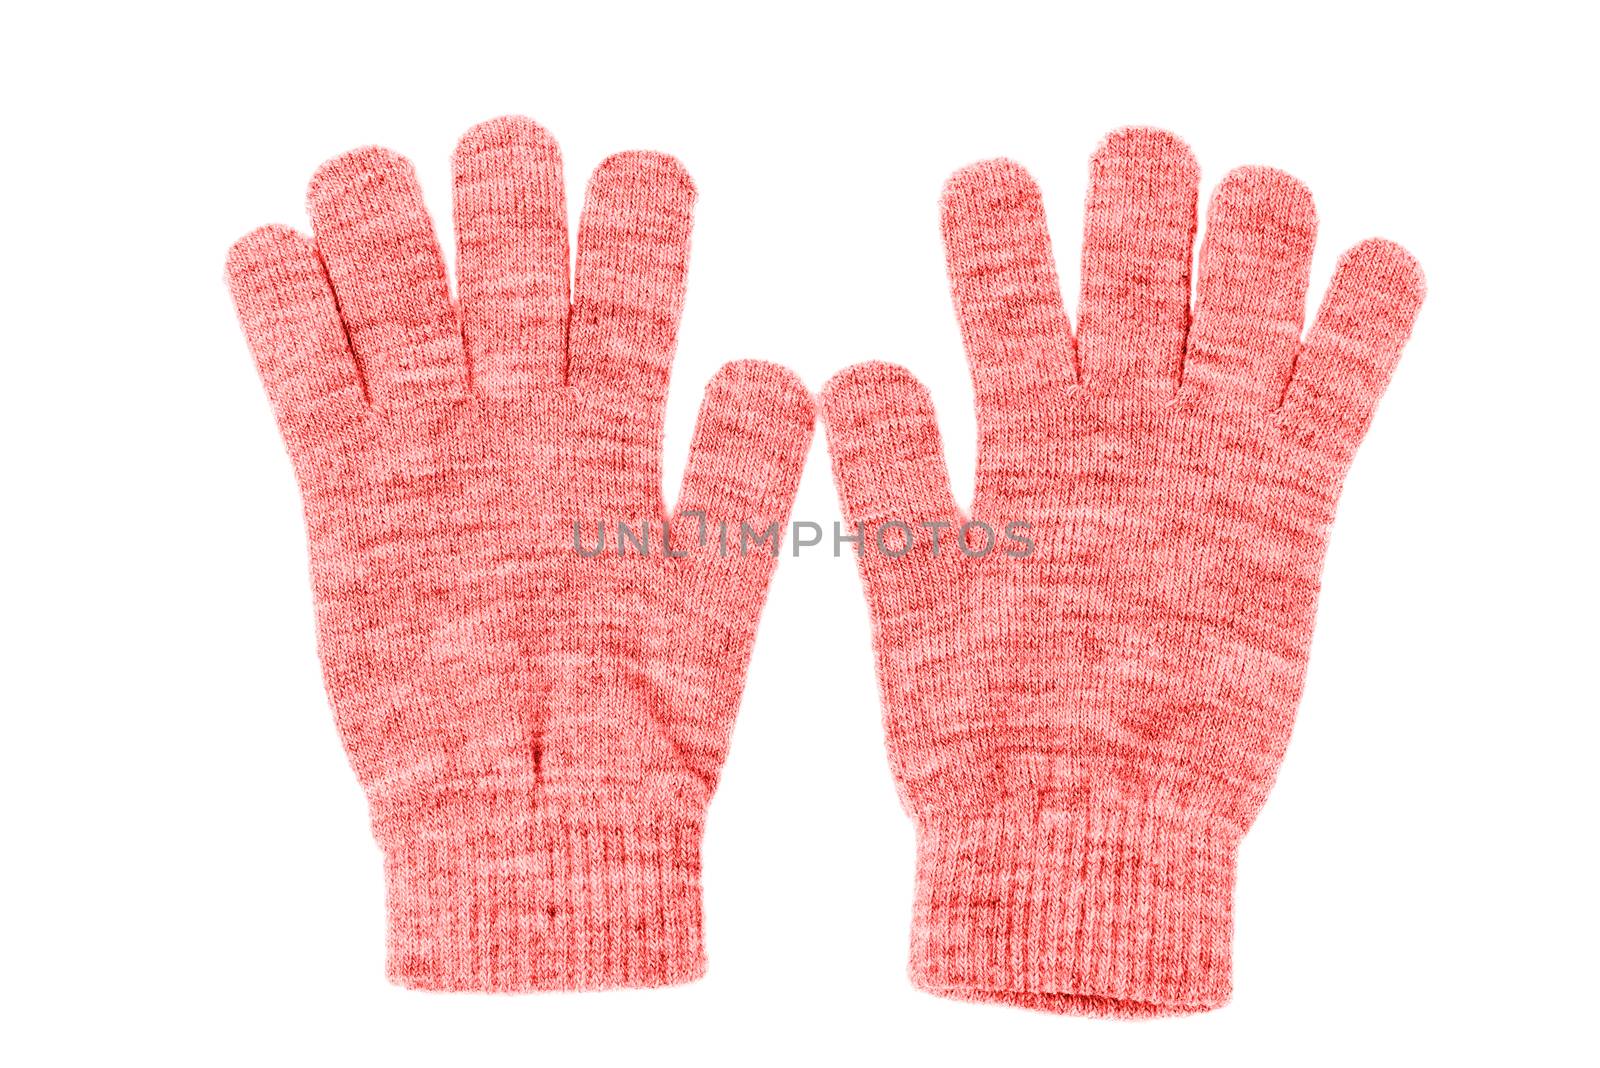 Wool gloves isolated on white